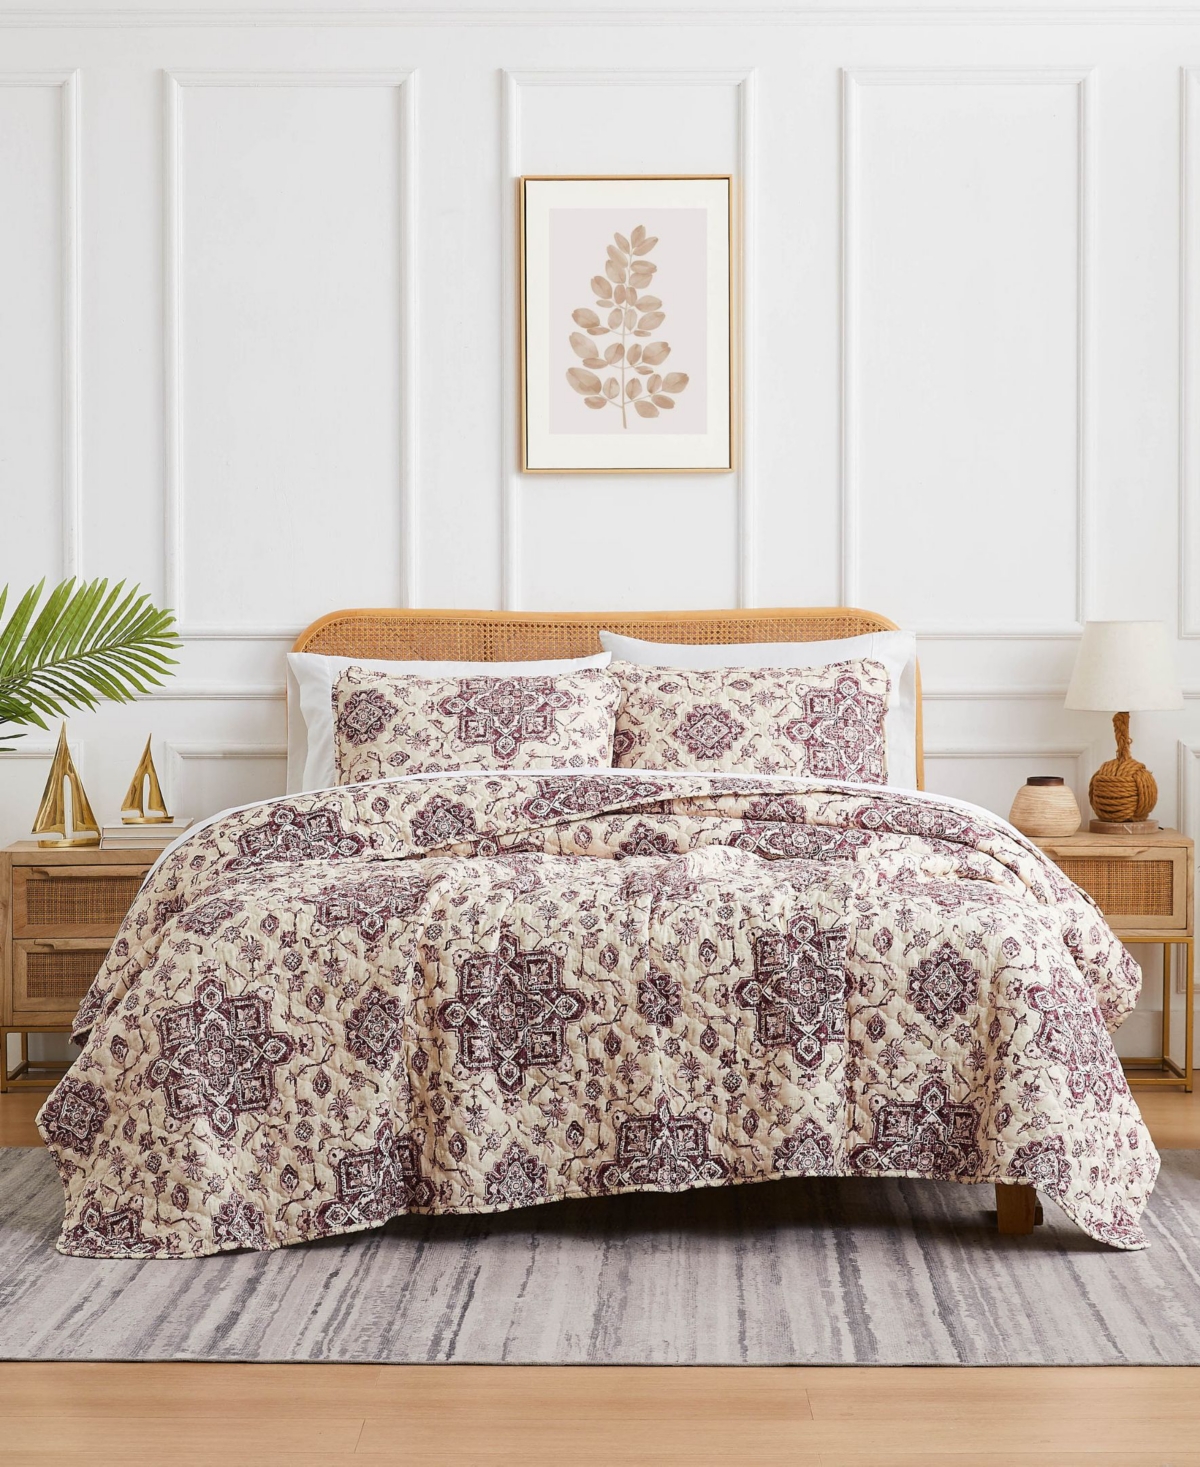 Southshore Fine Linens Persia Oversized 3 Piece Quilt Set, Full/queen In Eggplant